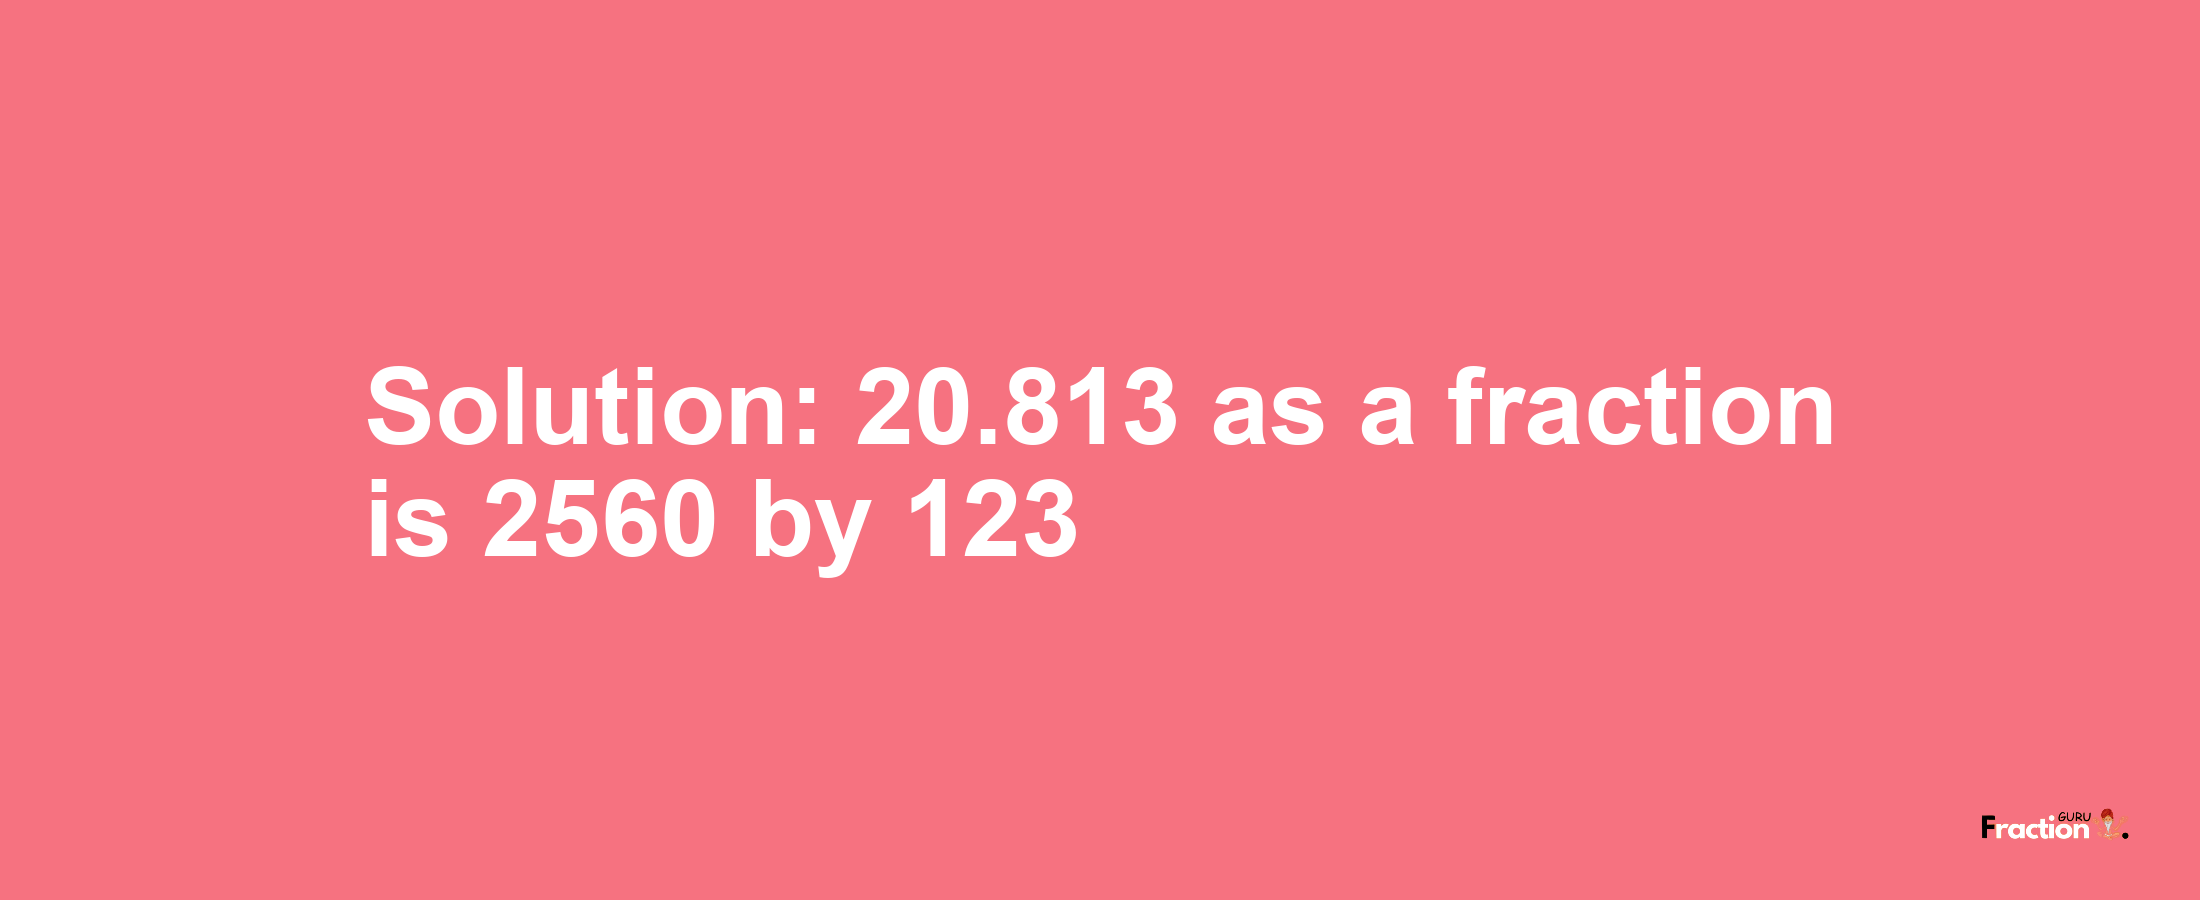 Solution:20.813 as a fraction is 2560/123